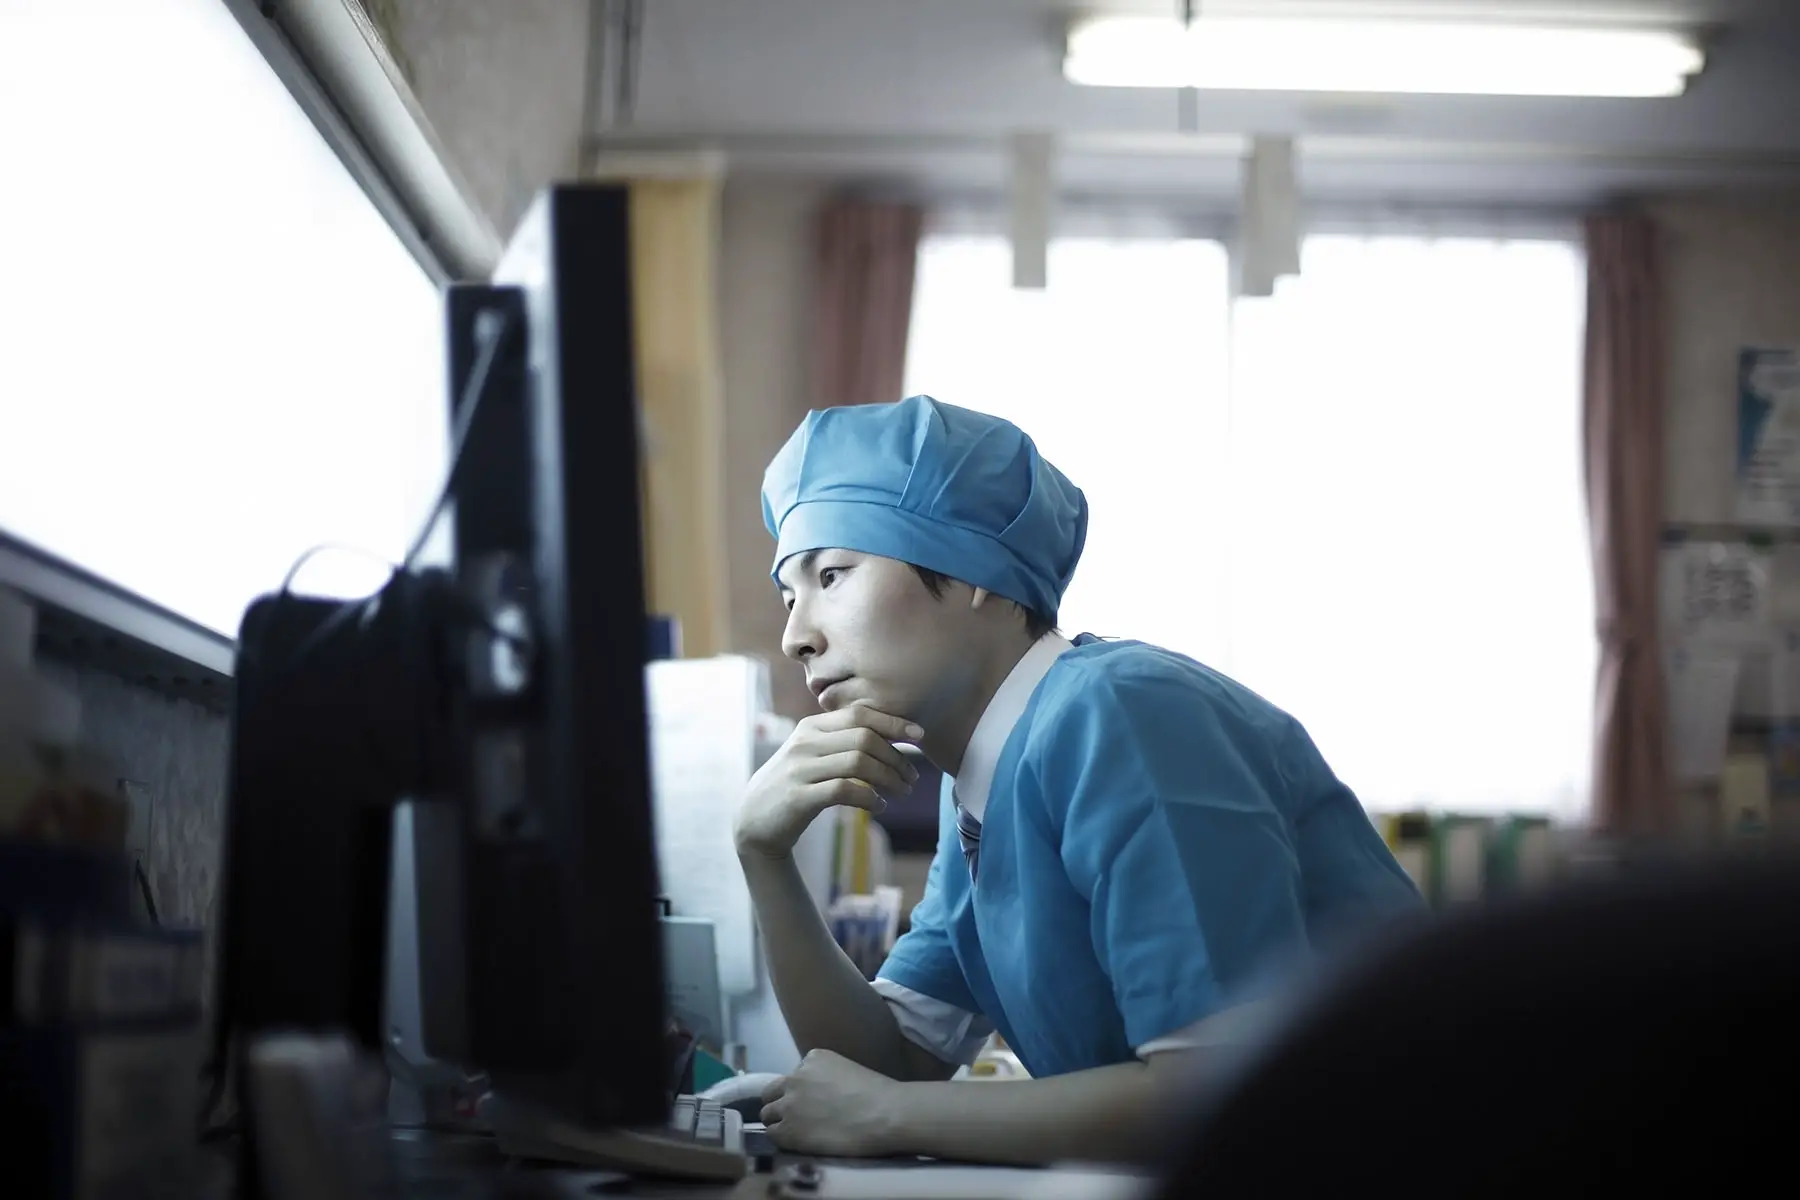 A doctor in scrubs sits looking at his desktop computer screen, deep in thought with his hand on his chin